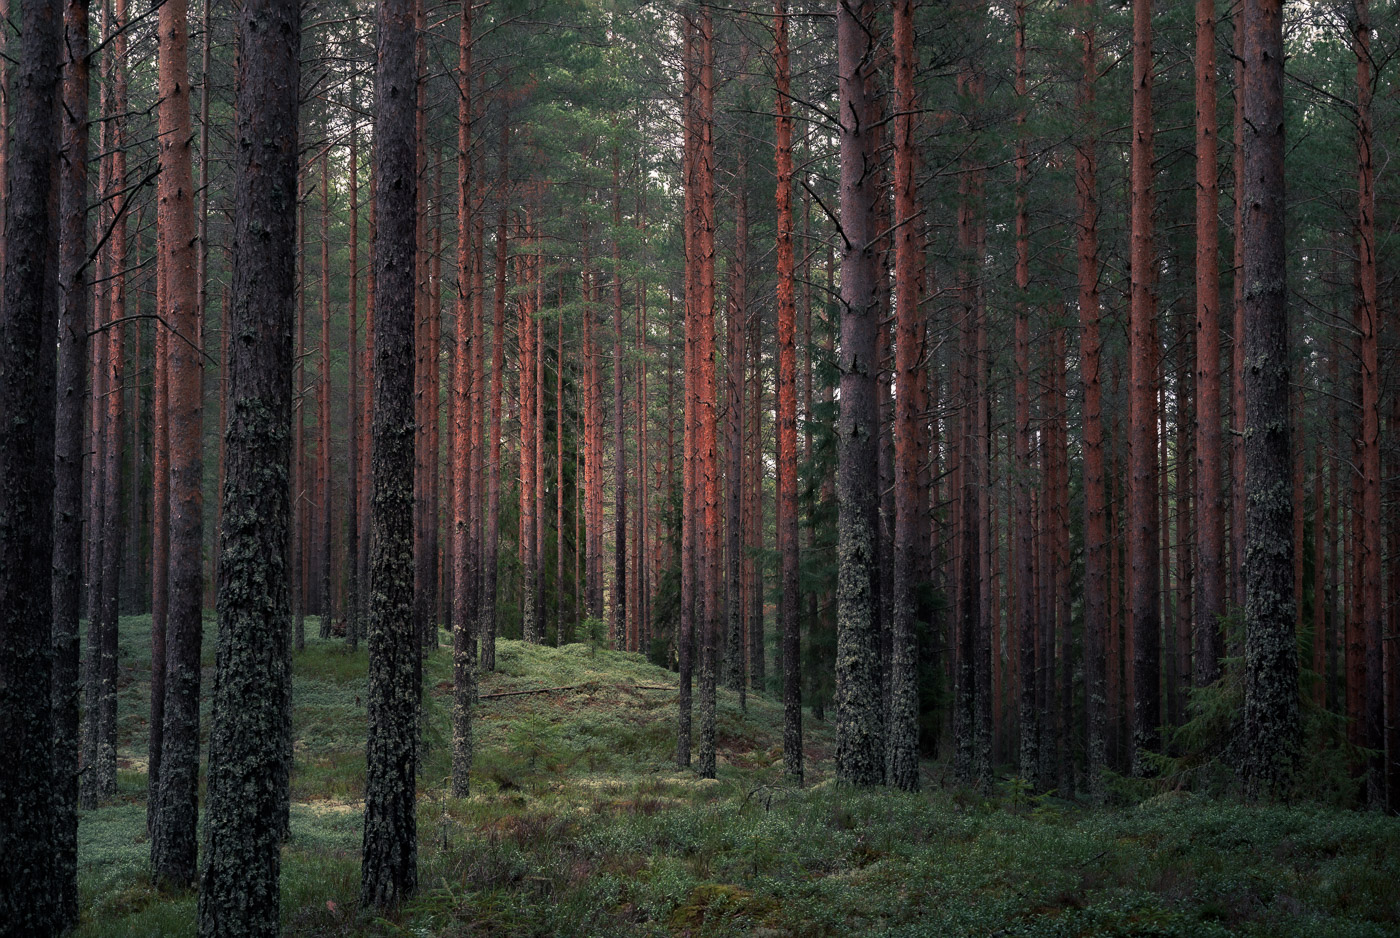 Red pine trees standing tall in a green forest in Sweden